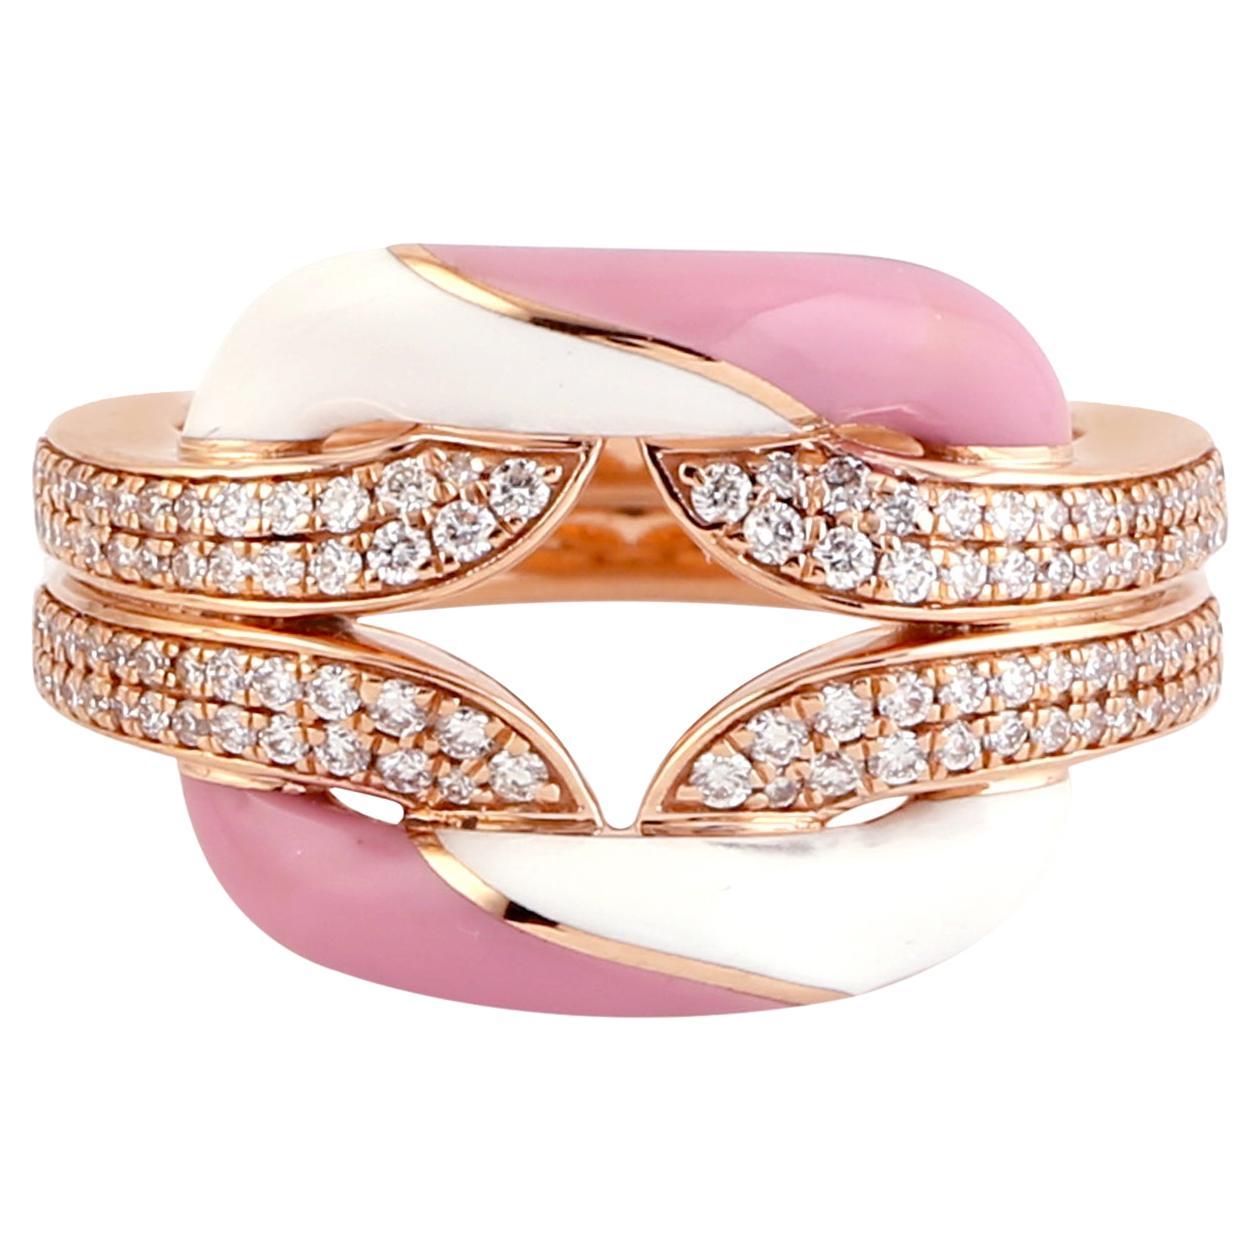 Pink & White Ceramic Inlay Ring with Vs Diamonds Made in 18k Rose Gold